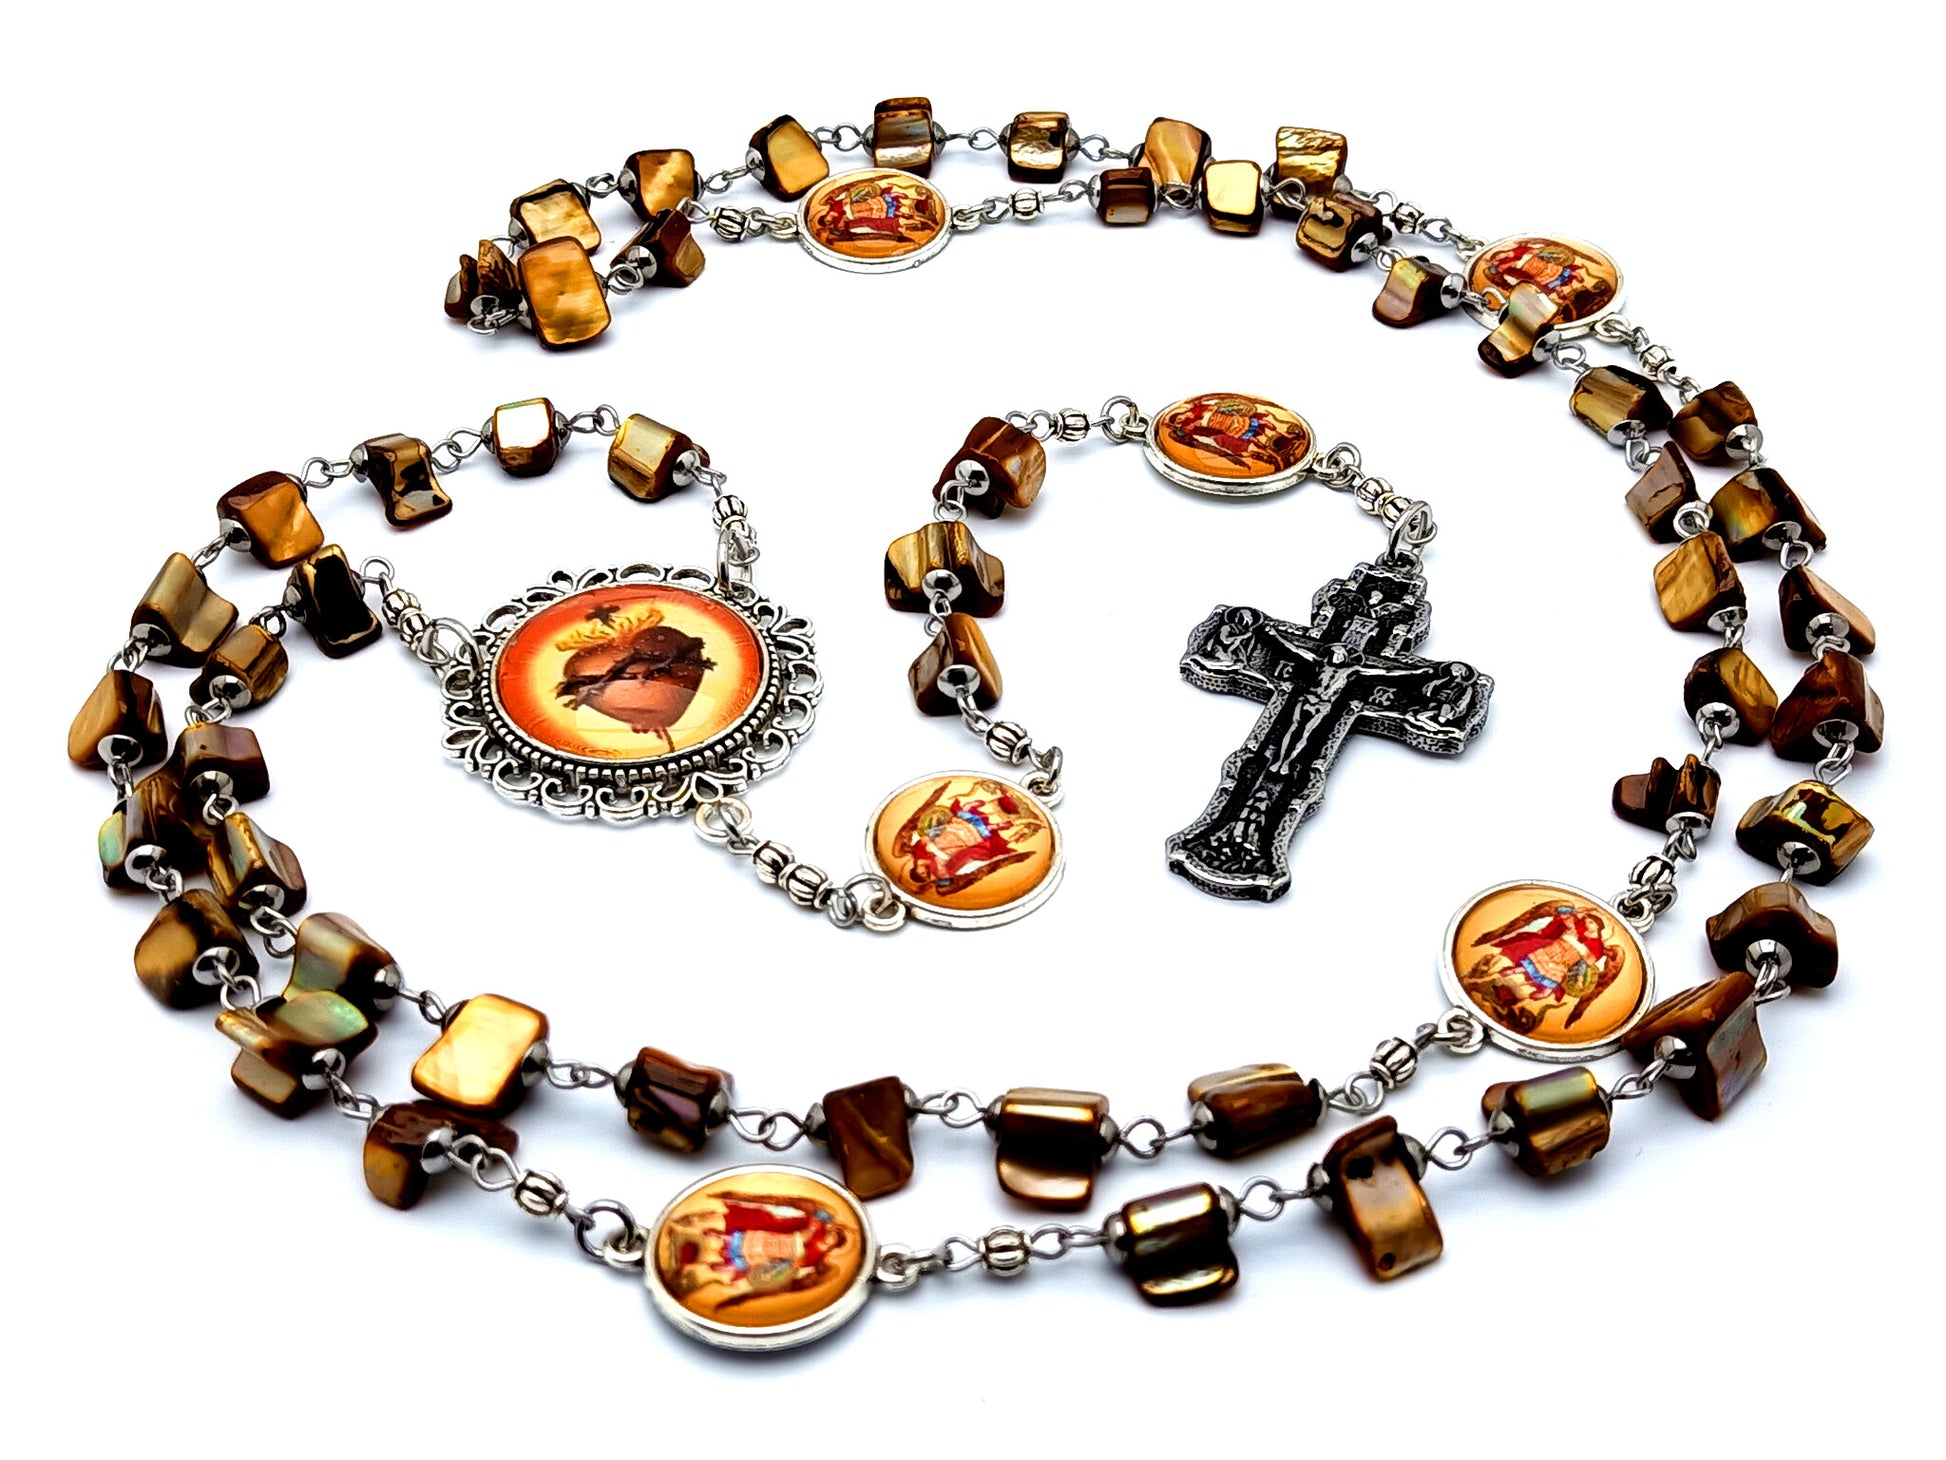 Sacred Heart of Jesus and Saint Michael unique rosary beads with shell beads and Orthodox style stainless steel crucifix.